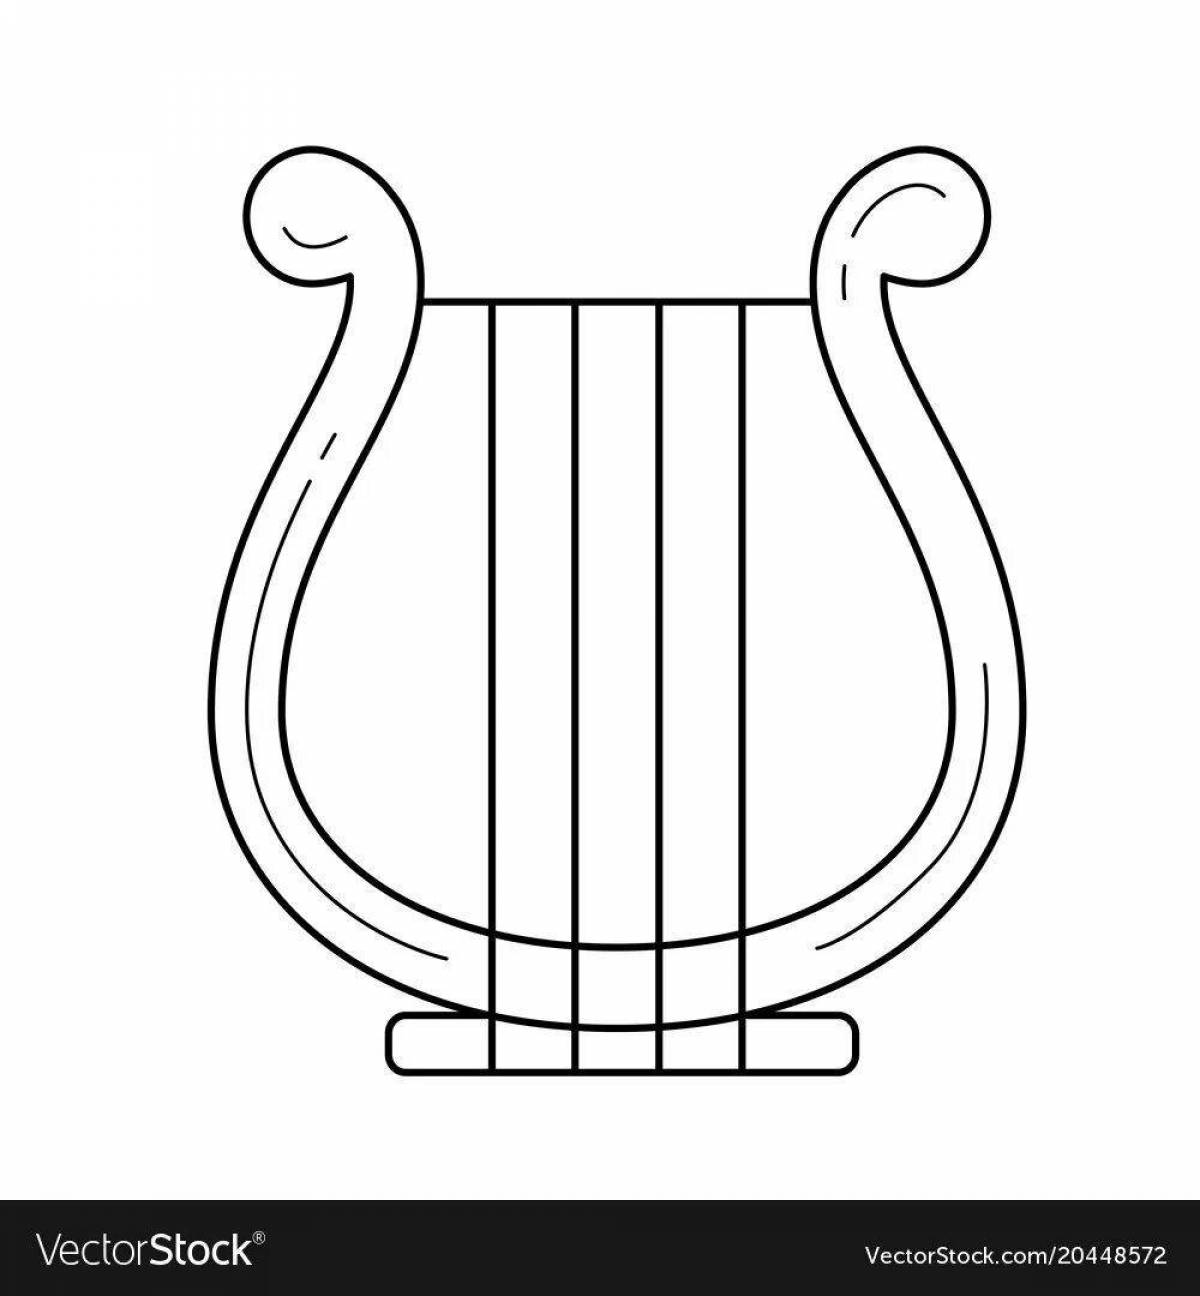 Charming lyre coloring book